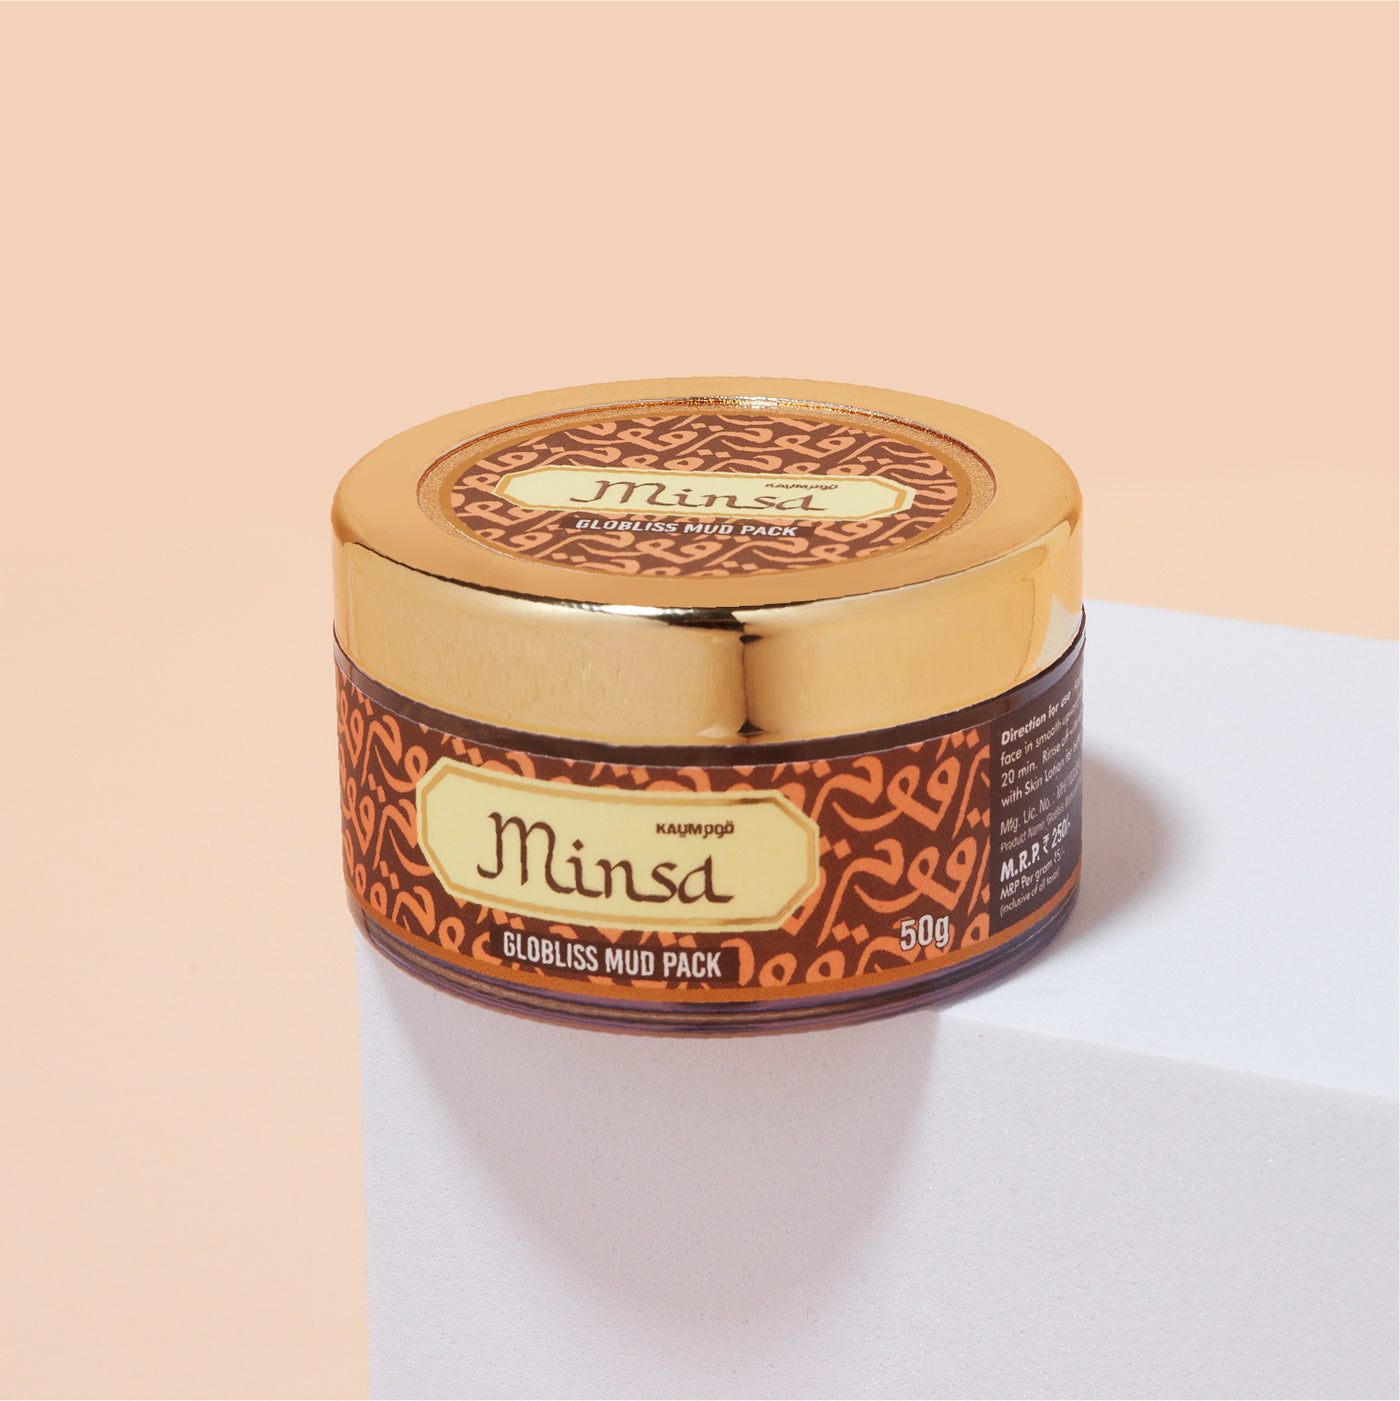 Minsa Globliss Mud Pack 50g: Indulge Your Skin in the Purity of Nature